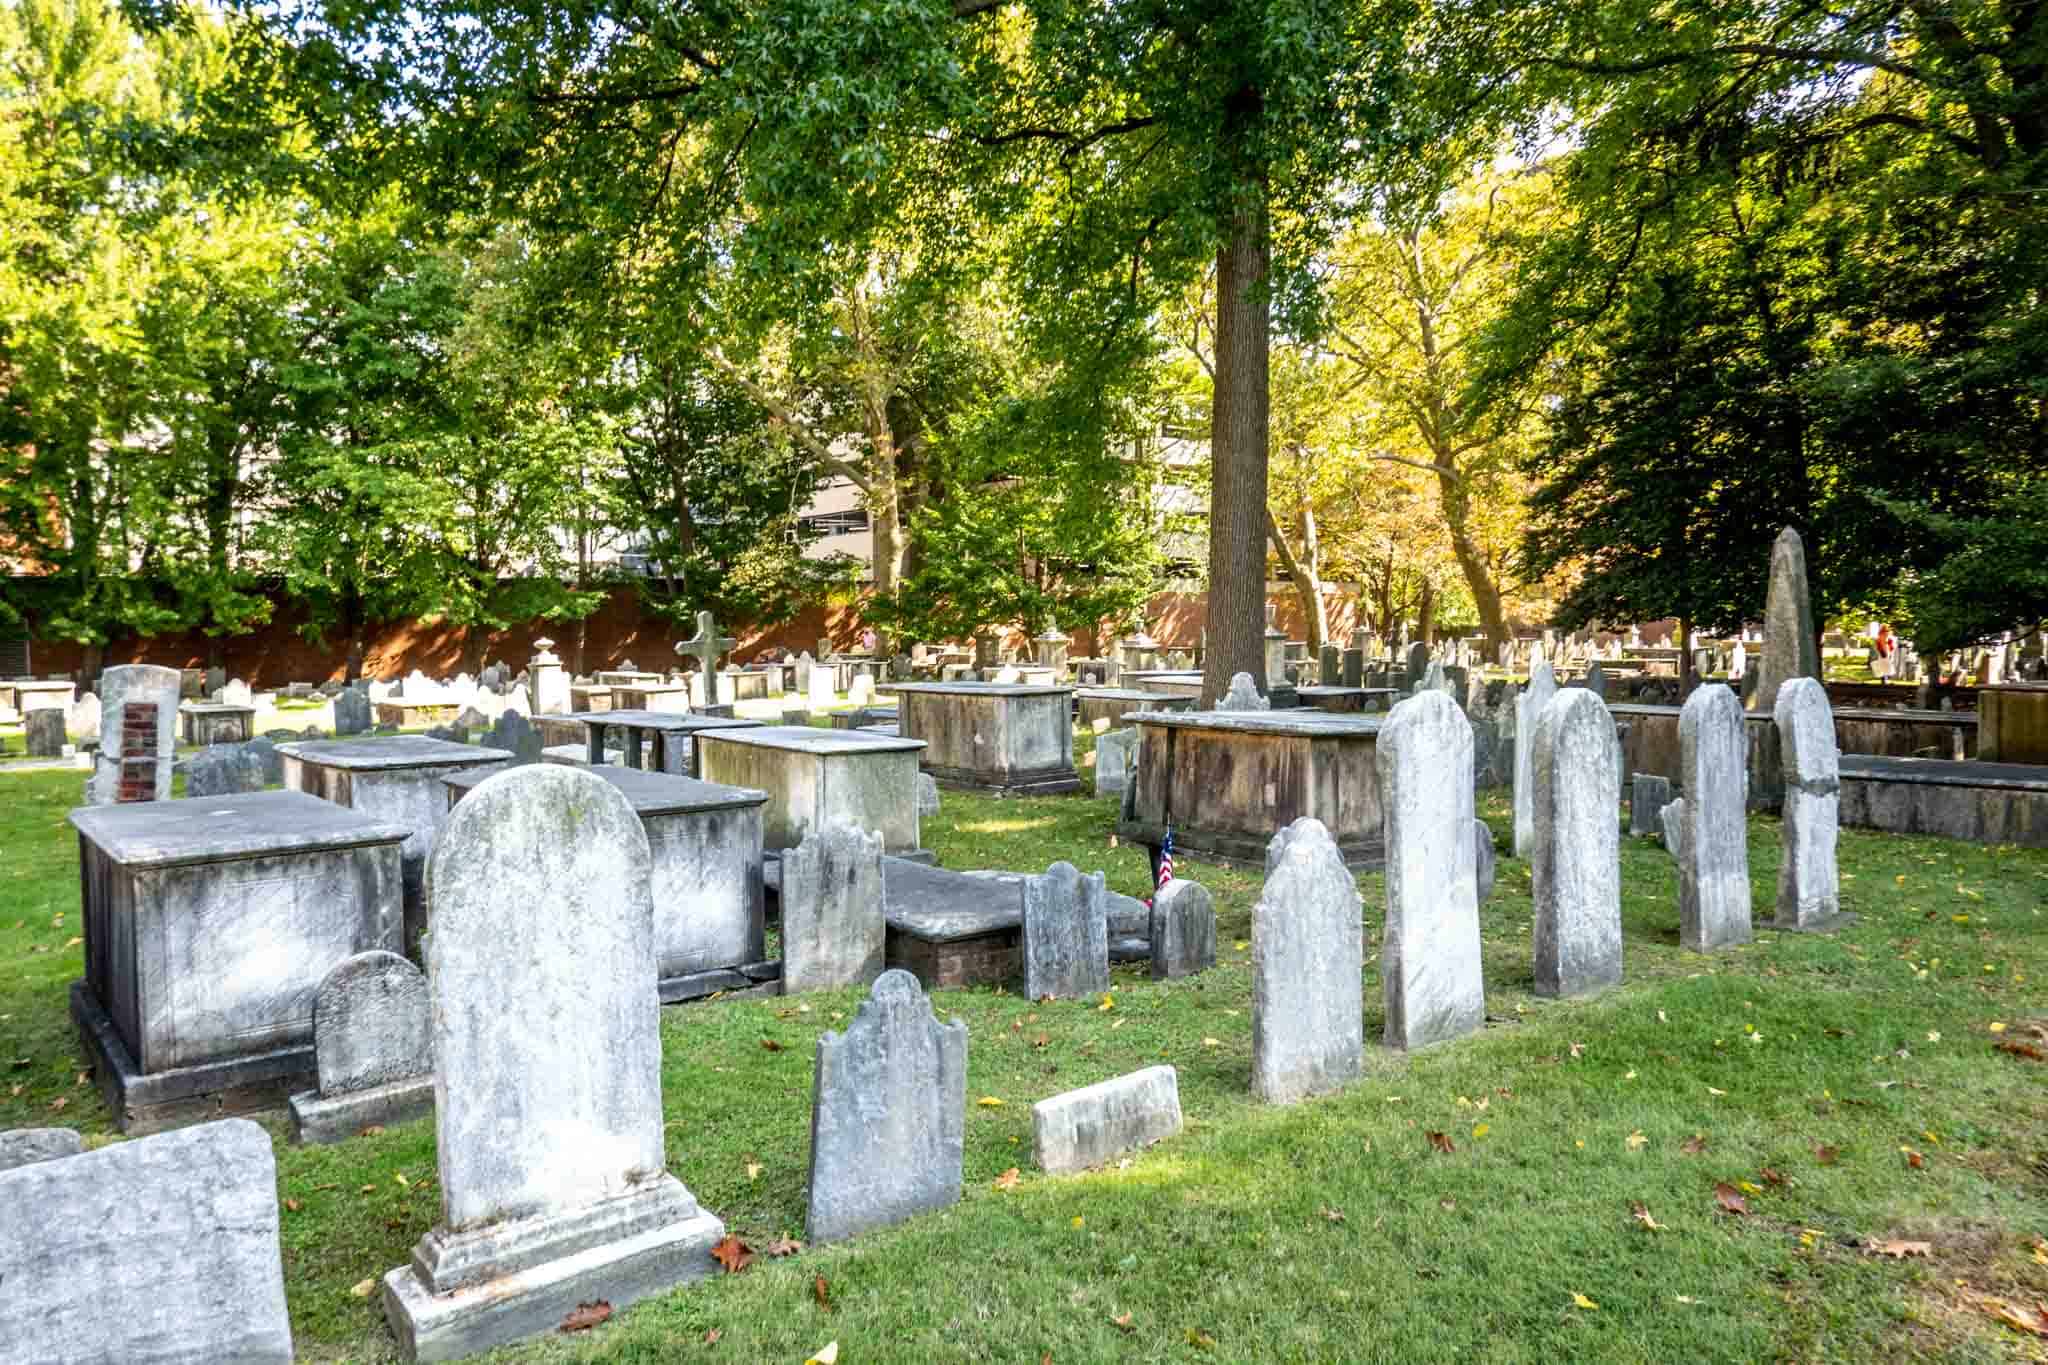 Rows of old stone headstones in a burial ground.